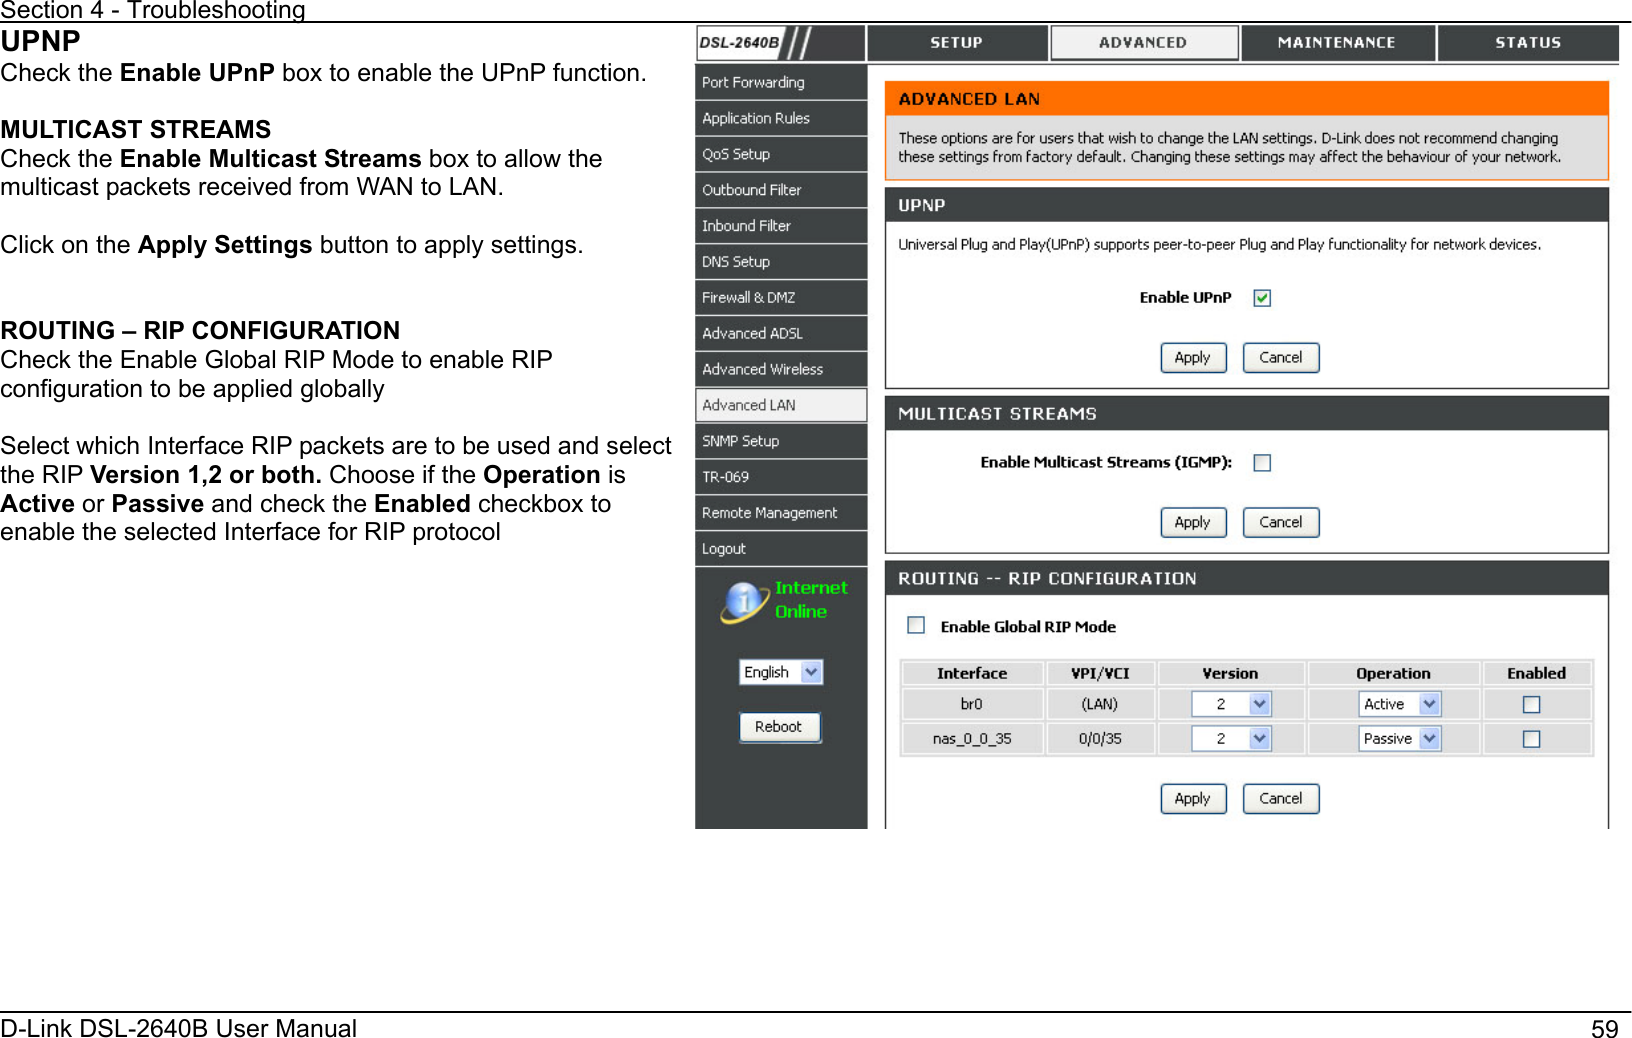 Section 4 - Troubleshooting D-Link DSL-2640B User Manual                                       59UPNPCheck the Enable UPnP box to enable the UPnP function. MULTICAST STREAMS Check the Enable Multicast Streams box to allow the multicast packets received from WAN to LAN. Click on the Apply Settings button to apply settings. ROUTING – RIP CONFIGURATION Check the Enable Global RIP Mode to enable RIP configuration to be applied globally Select which Interface RIP packets are to be used and select the RIP Version 1,2 or both. Choose if the Operation isActive or Passive and check the Enabled checkbox to enable the selected Interface for RIP protocol 